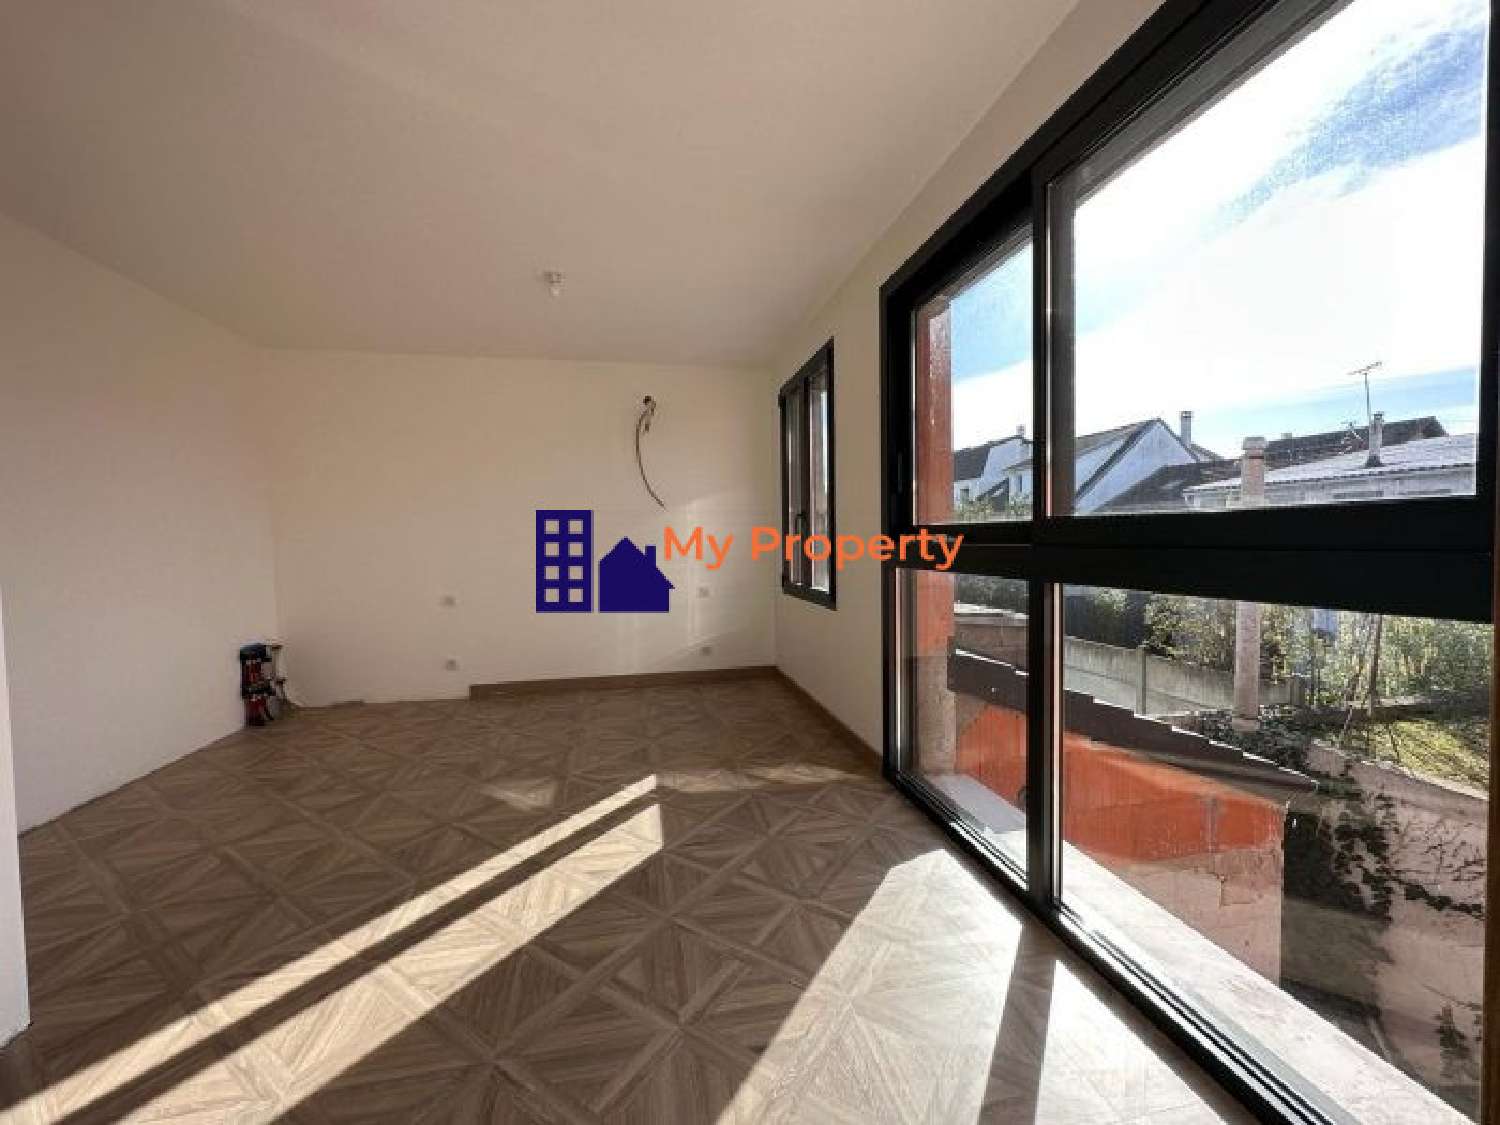  for sale house Montesson Yvelines 6